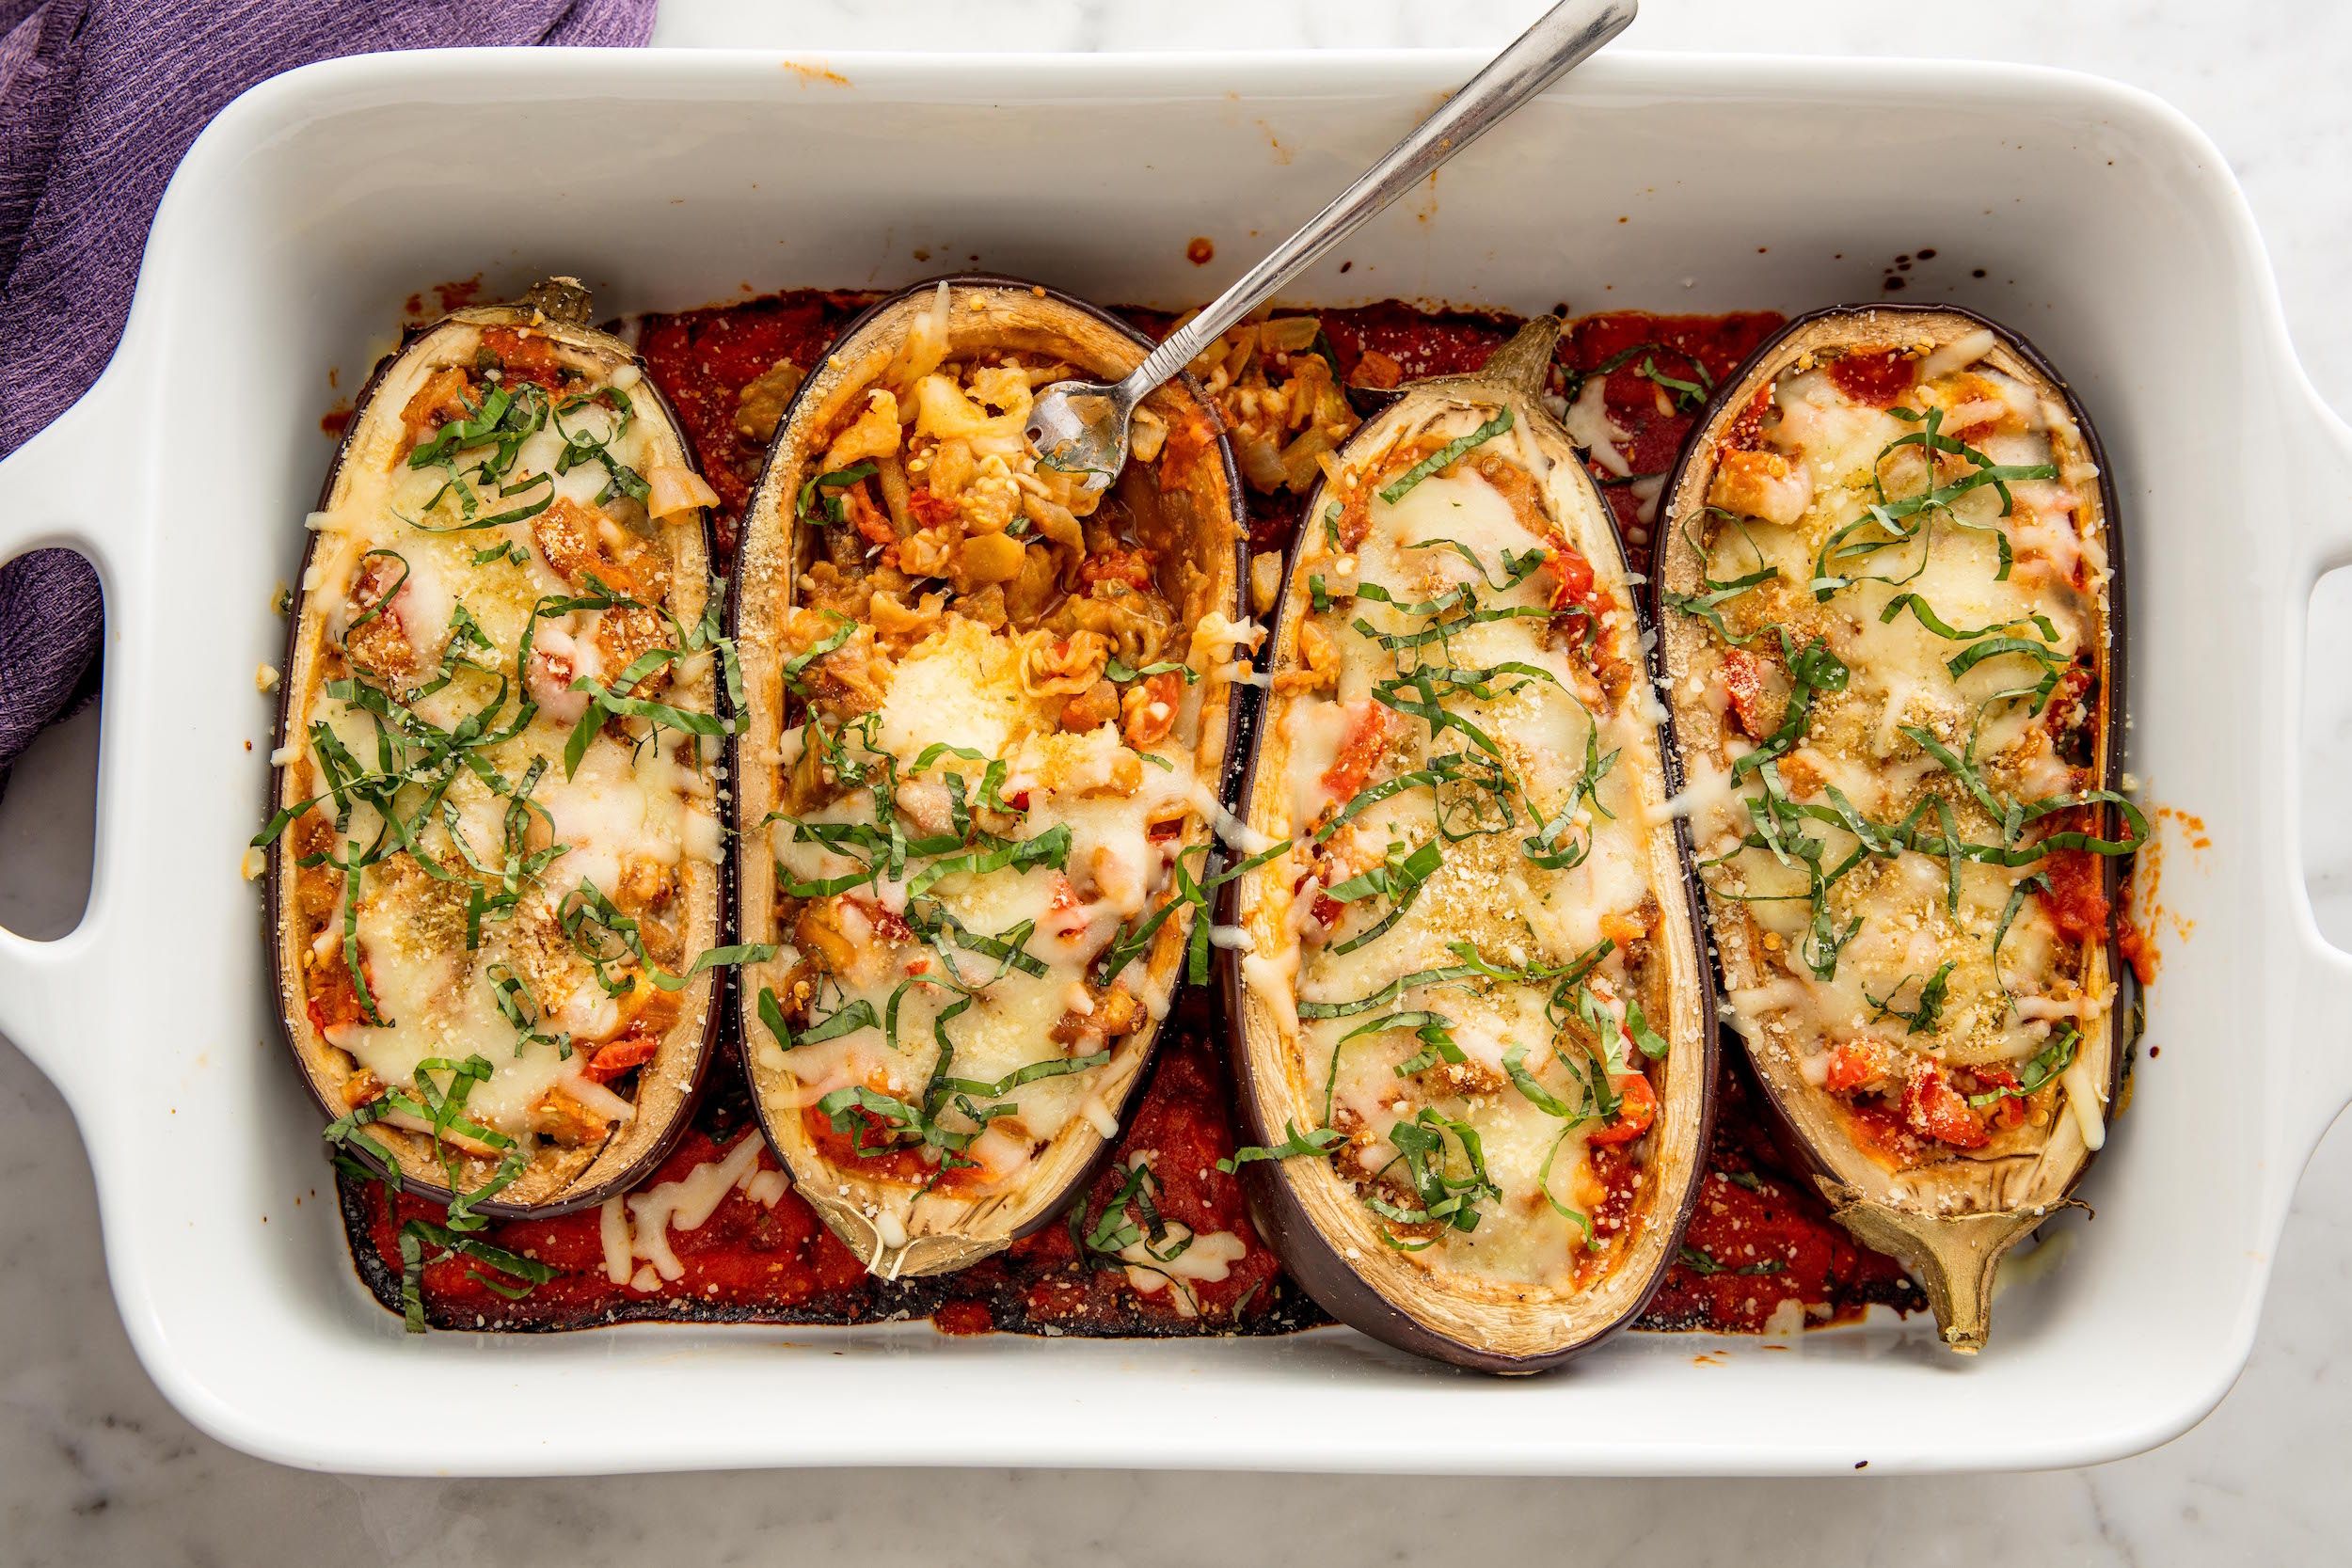 Best Stuffed Eggplant Parm Recipe How To Make Stuffed Eggplant Parm,Getting Rid Of Poison Ivy Rash